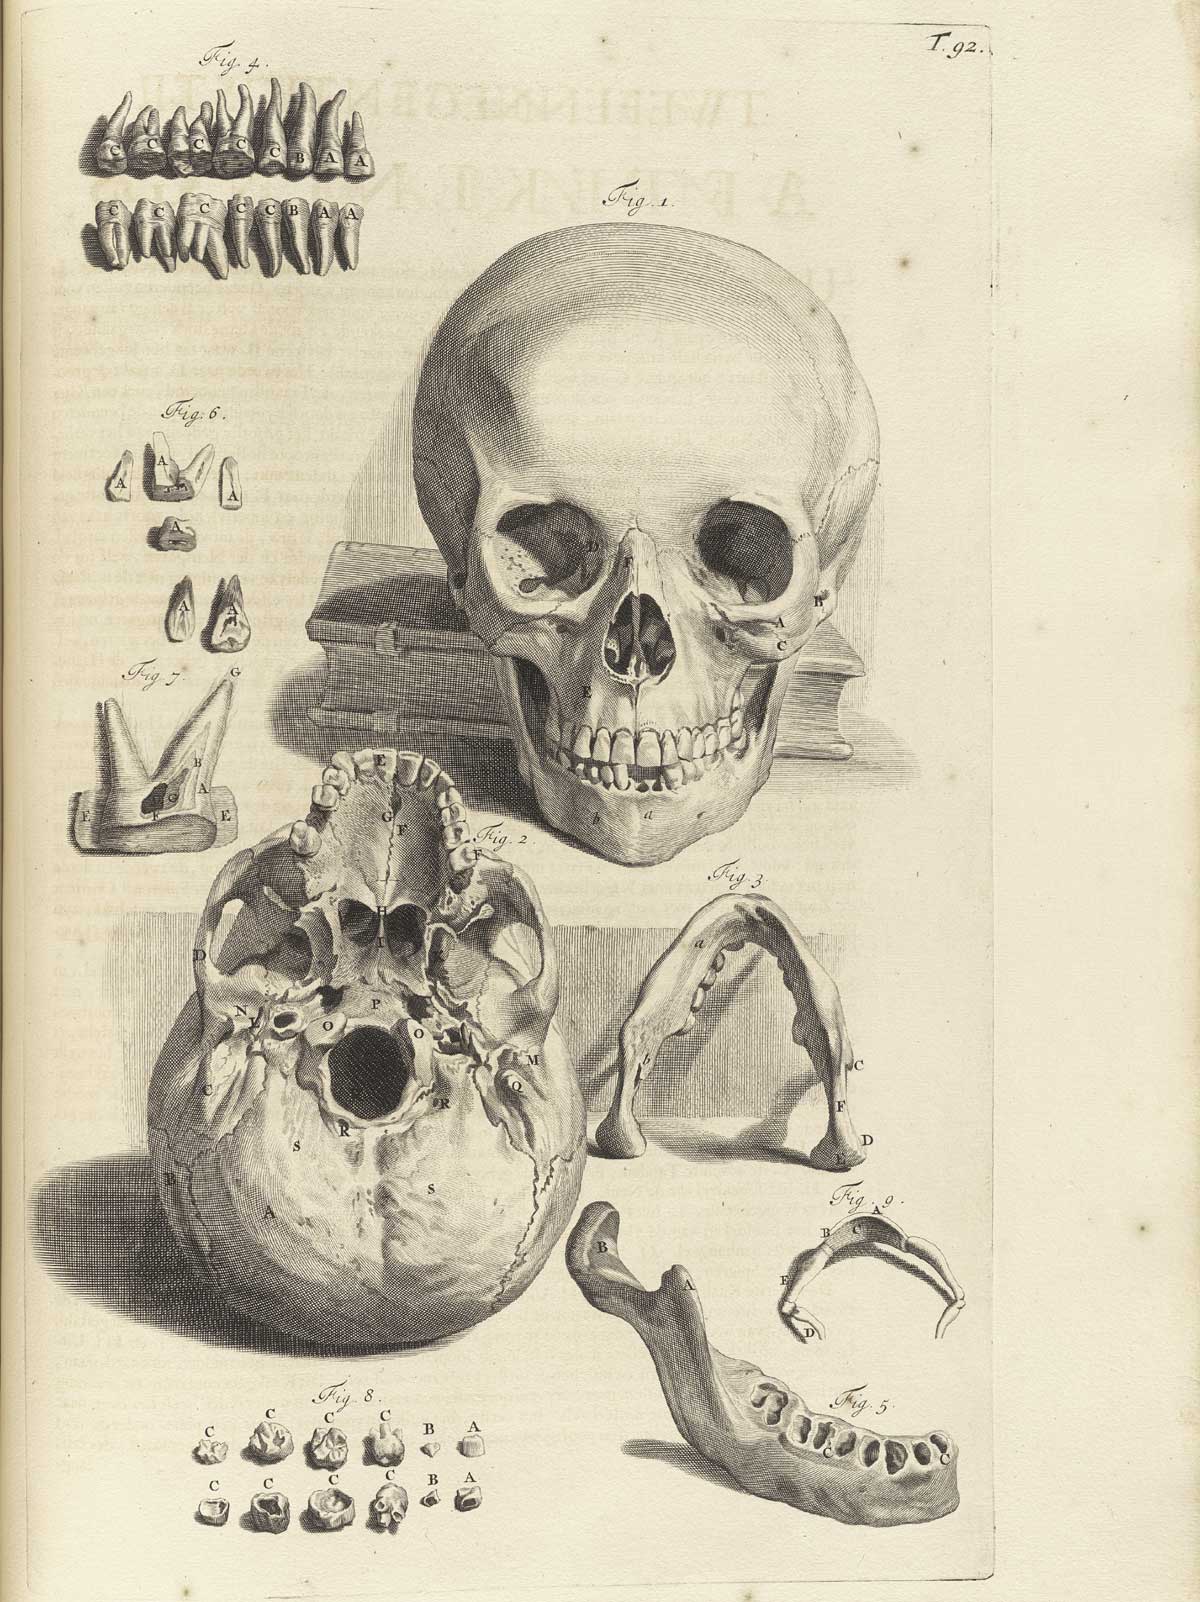 Engraving of two skulls with jaw bone fragments and teeth separated; the first skull above is complete including the mandible and teeth, facing the viewer leaning on a closed book behind it; the second skull below is upside down and lacking the mandible with a view of the foramen magnum, parietal bone, and hard palate; to the bottom right are two views of a detatched mandible and a hyoid bone; at the bottom left are ten small bones from the inner ear; in the upper left of the image are 16 teeth with their roots laid out in order from molars to incisors; from Govard Bidloo’s Ontleding Des Menschelyken Lichaams, Amsterdam, 1690, NLM Call no. WZ 250 B5855anDu 1690.